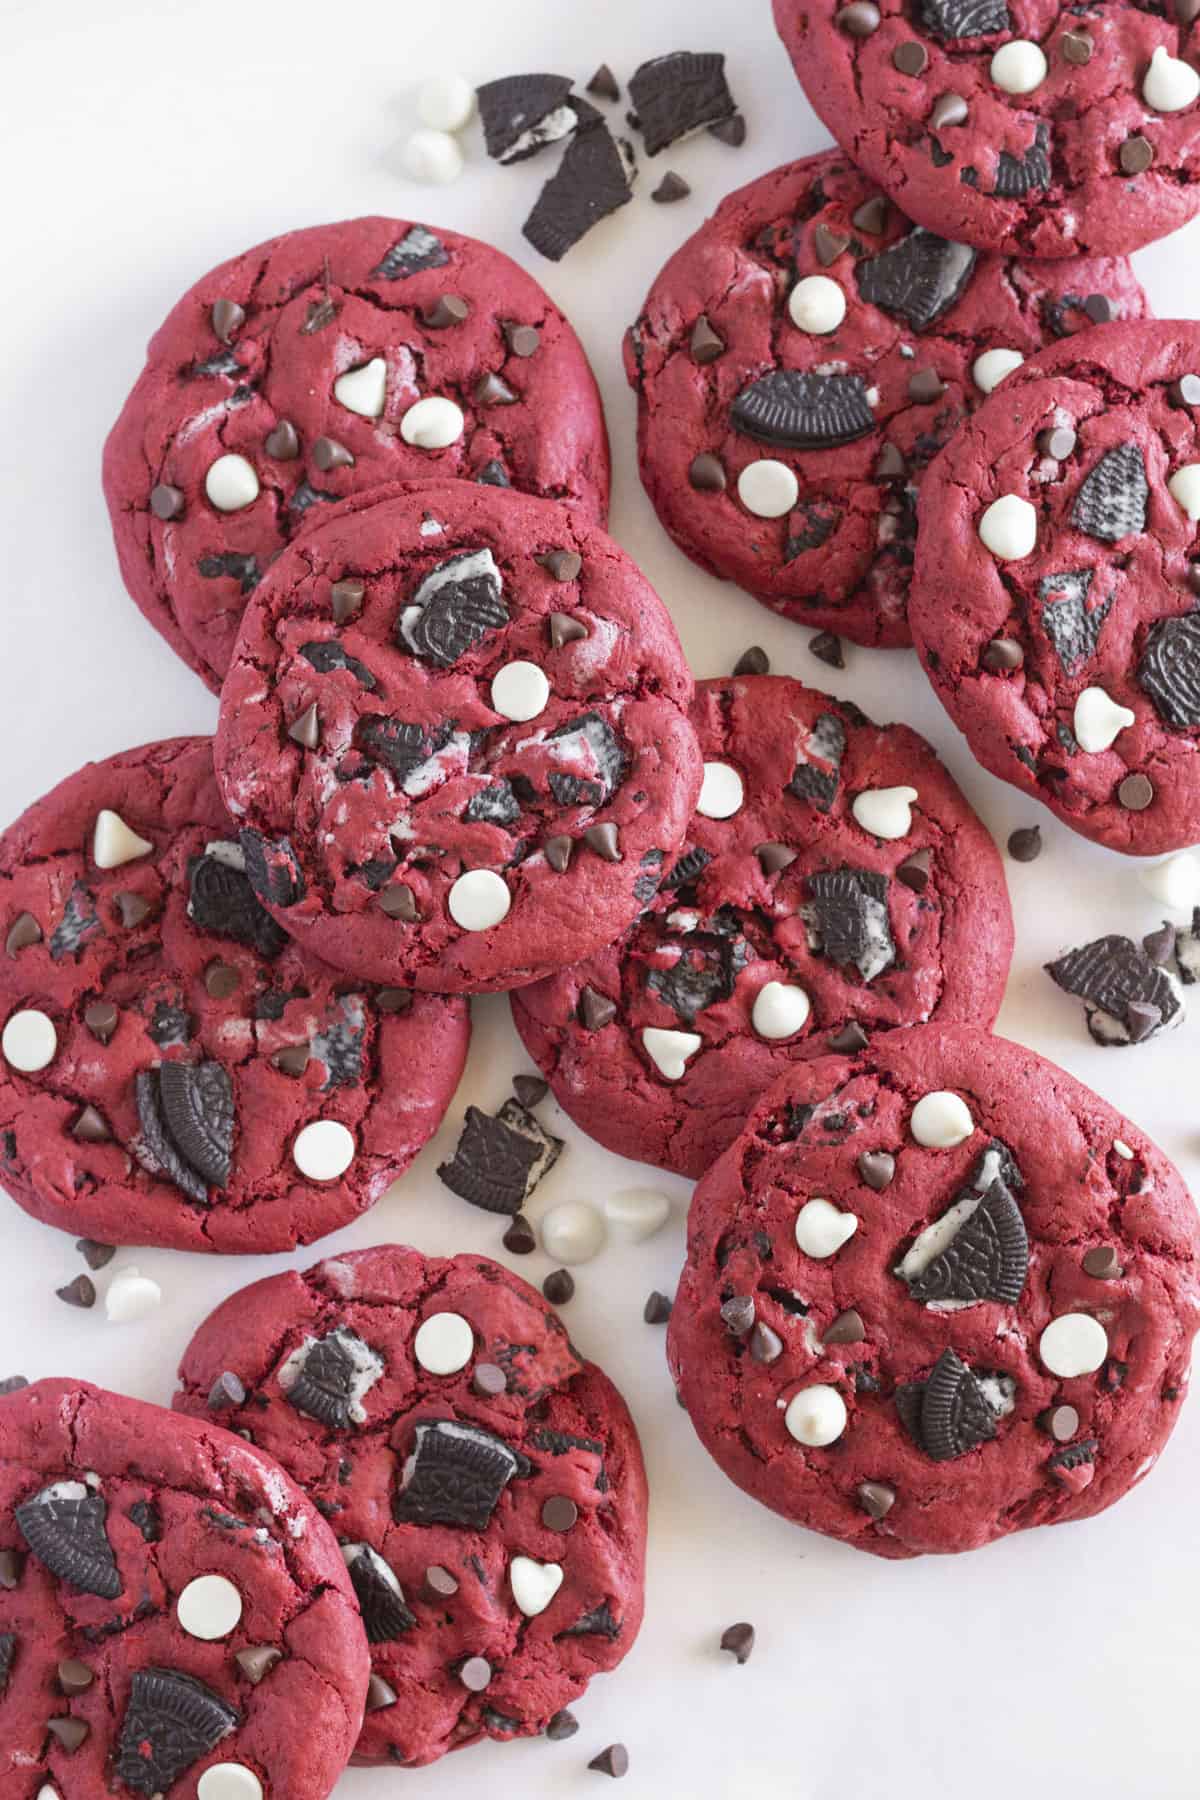 Looking down on 10 Red Velvet Oreo Cookies that are deep red in color with chunks of Oreo cookies and chocolate chips.